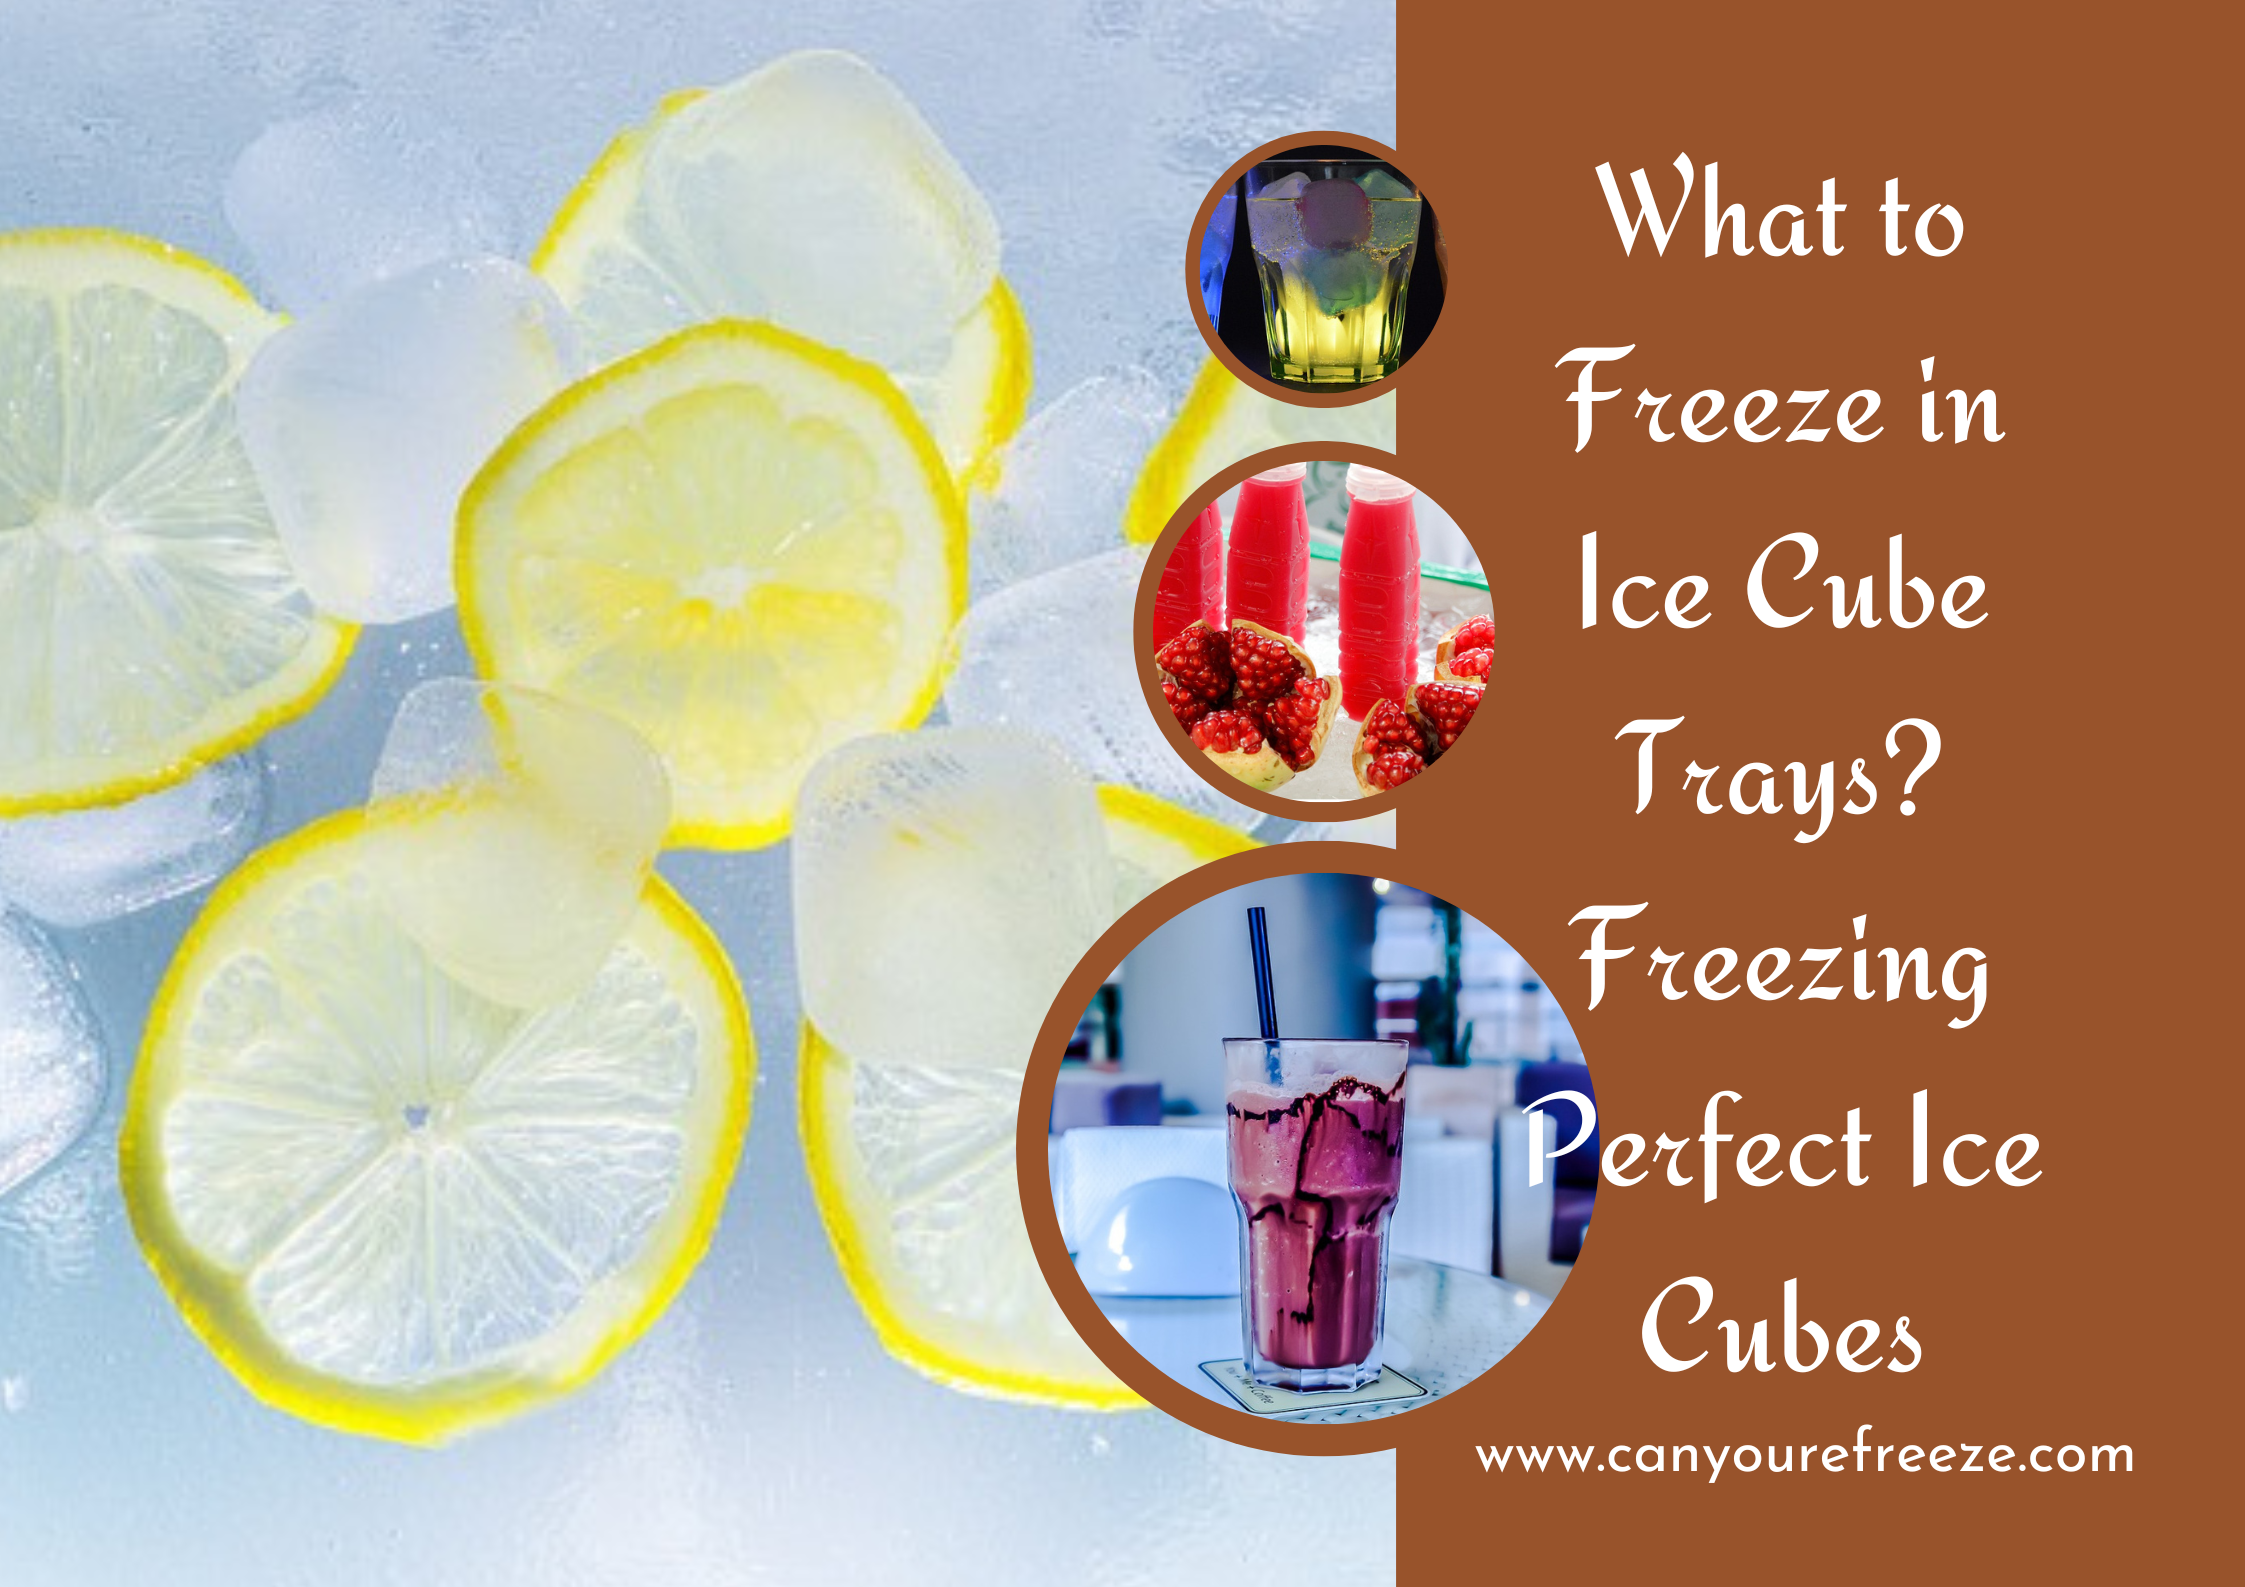 What to freeze in ice cube trays? Freezing perfect ice cubes